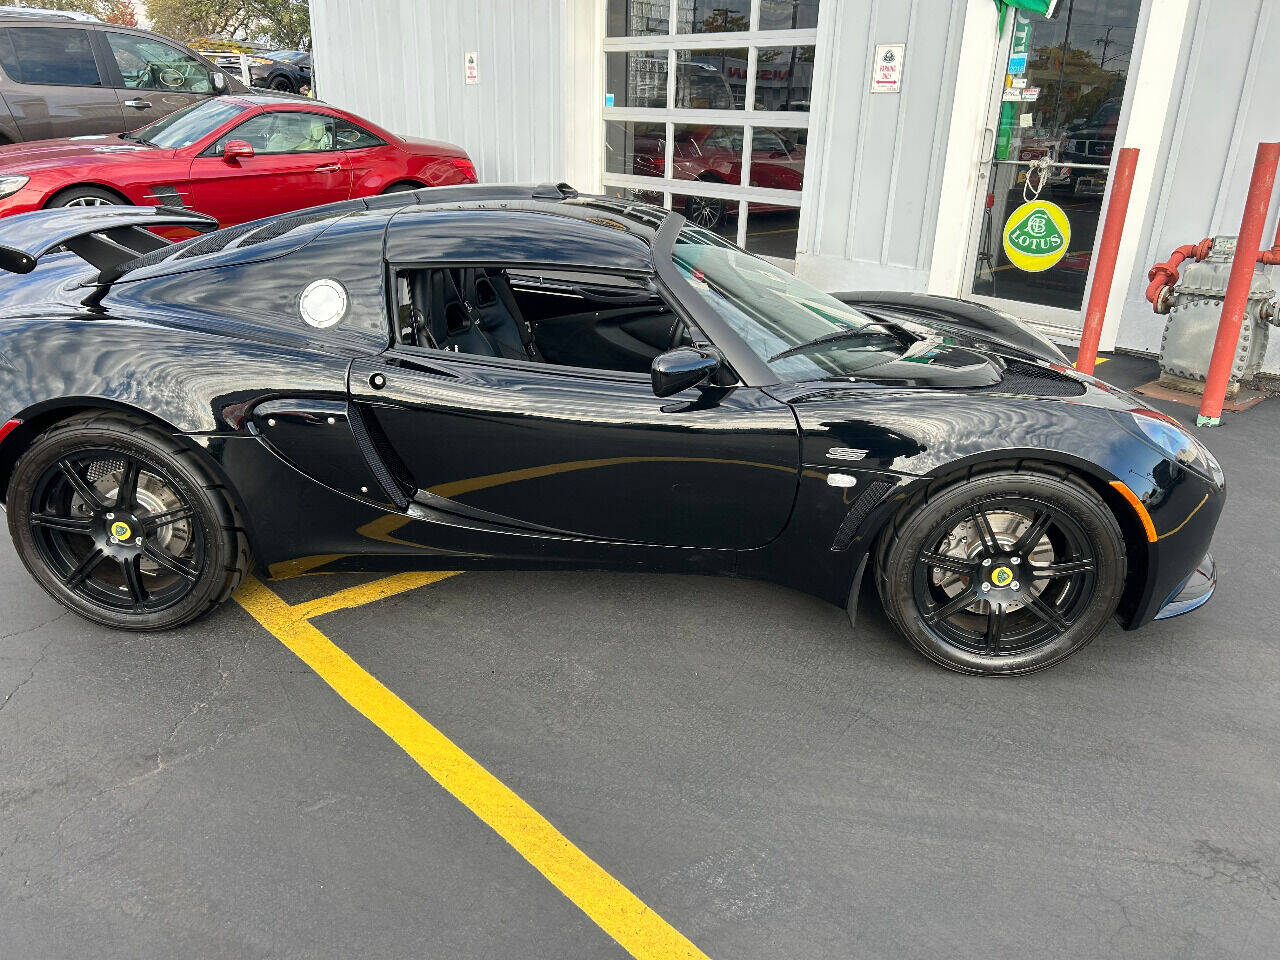 Used 2007 Lotus Exige For Sale | Lotus of West New York